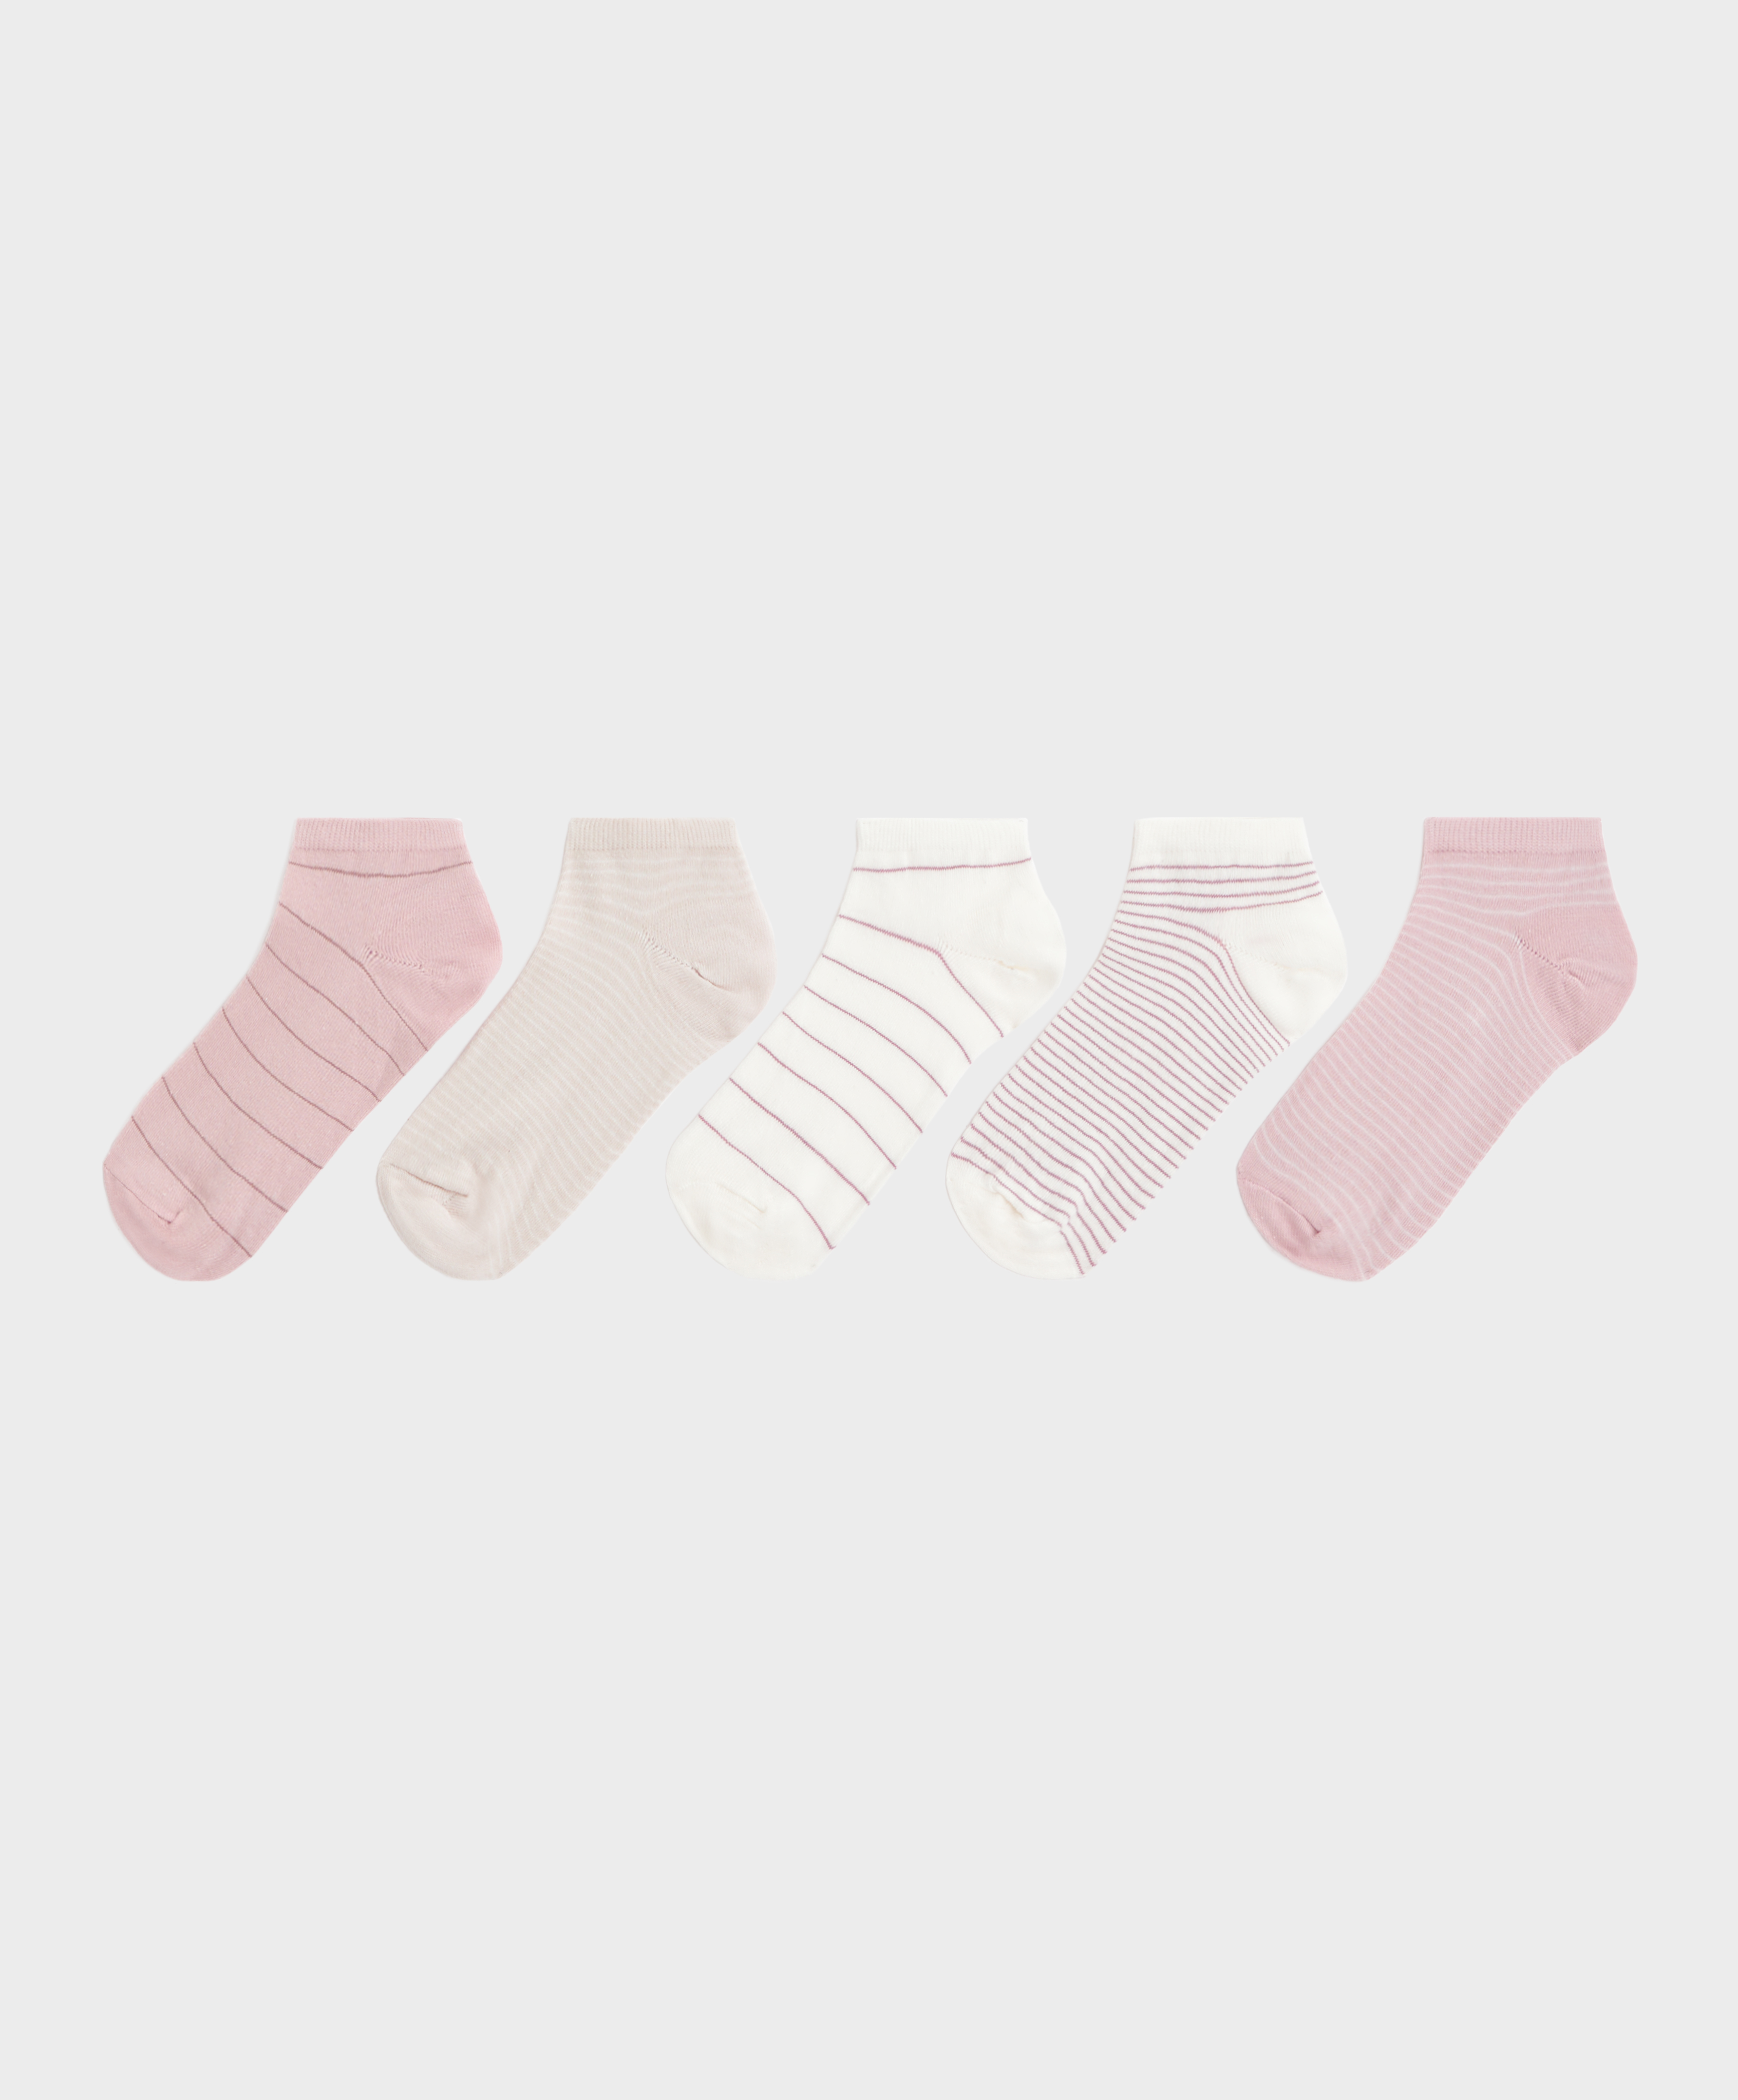 5 pairs of textured cotton sneaker socks